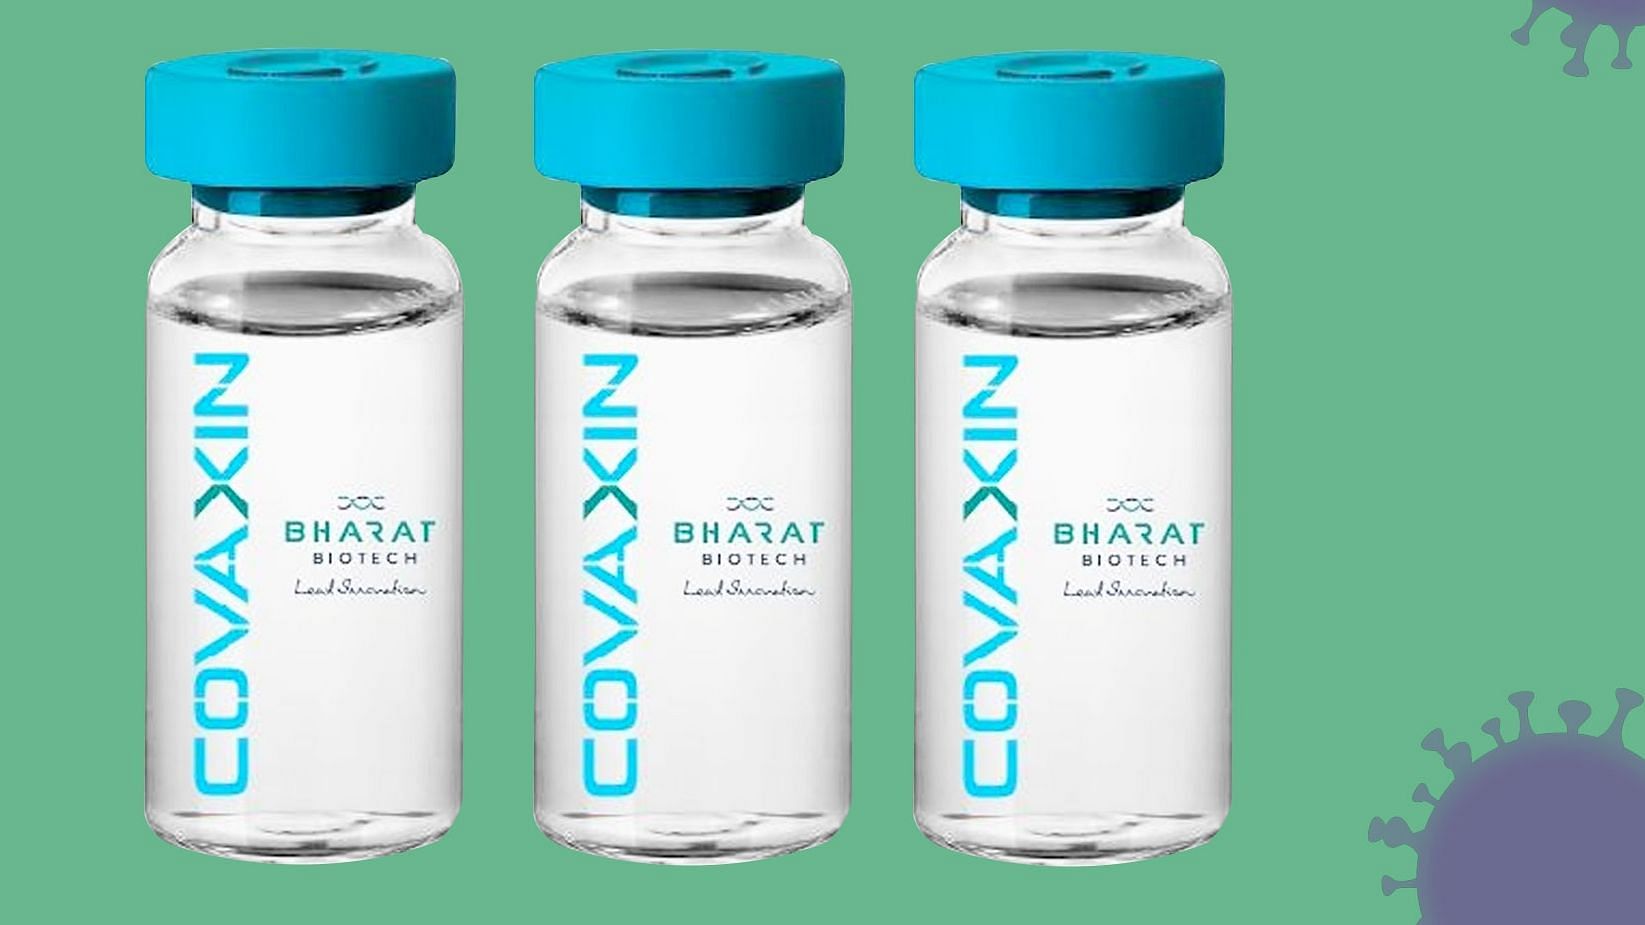 Bharat Biotech, the company which is developing one of India’s indigenous vaccine candidates called Covaxin, said the vaccine will be at least 60% effective.&nbsp;